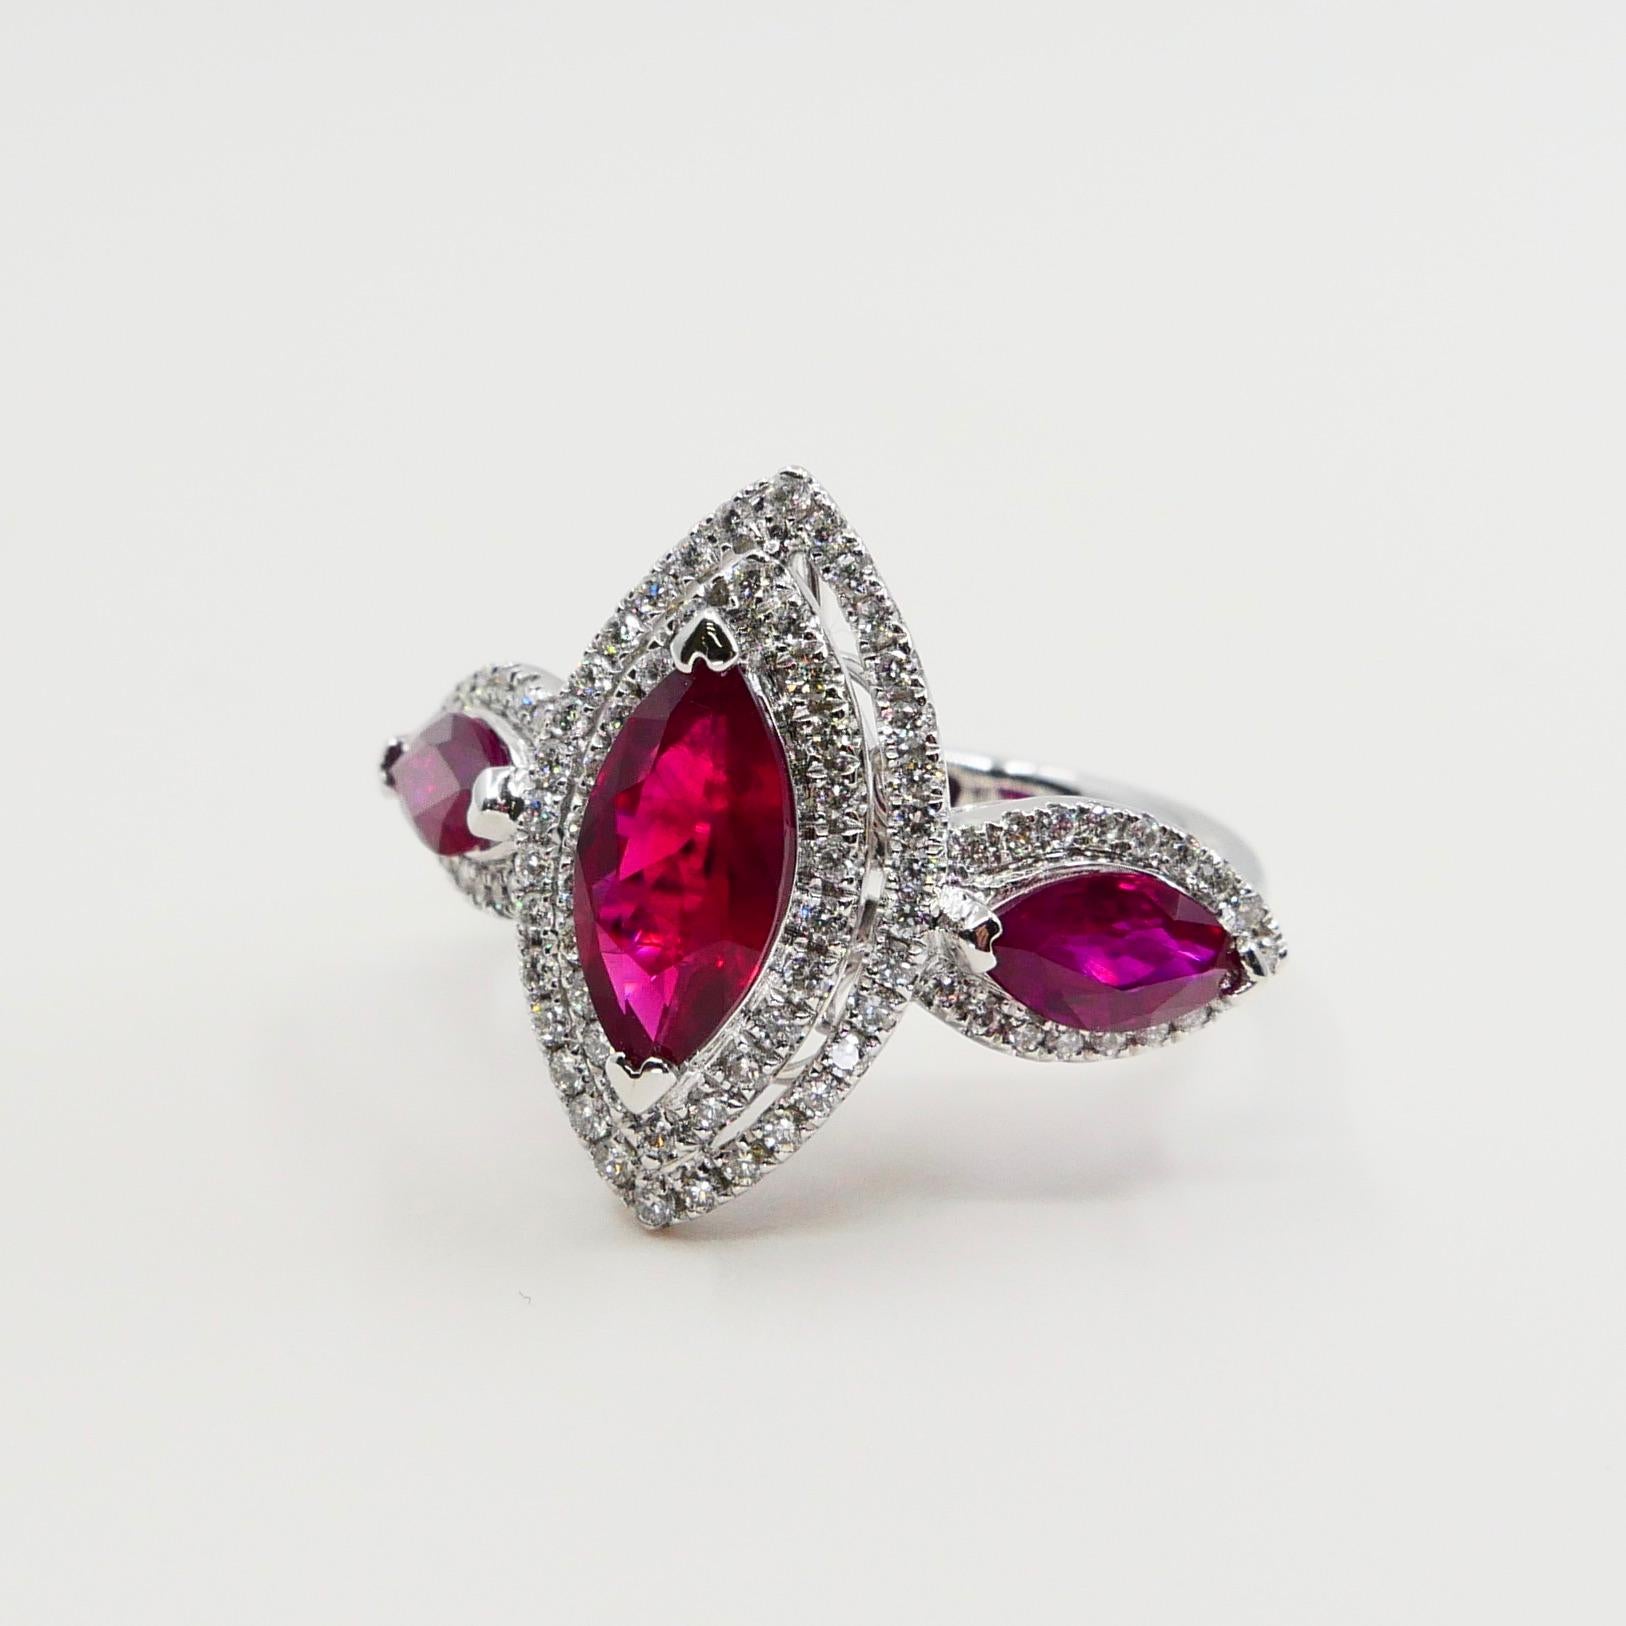 Contemporary 18 Karat White Gold Burma Red Ruby & Diamond Cocktail Ring, Gem Crystal, N.O.S. For Sale